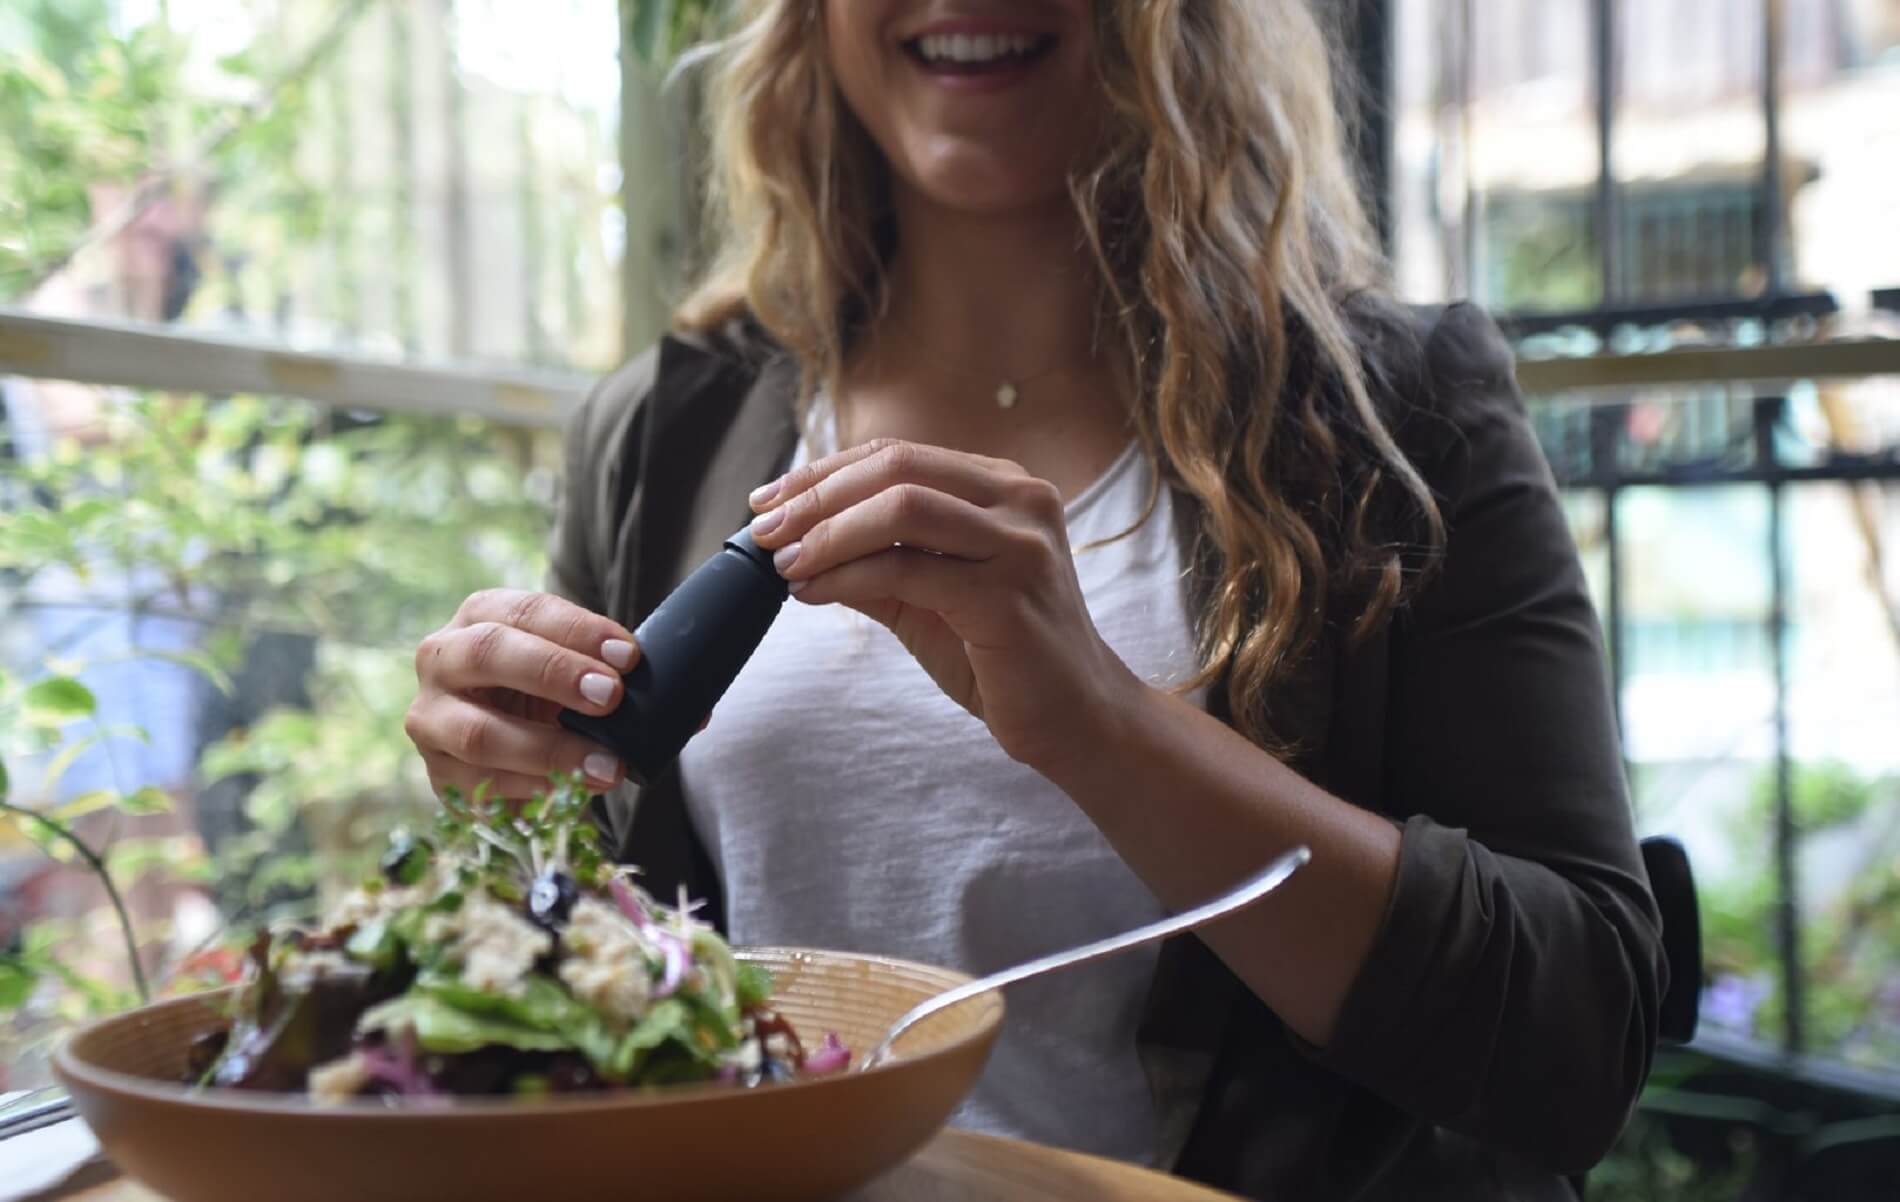 Nutrition - a smiling woman is holding Lumen device, in front of her is a table with a salad